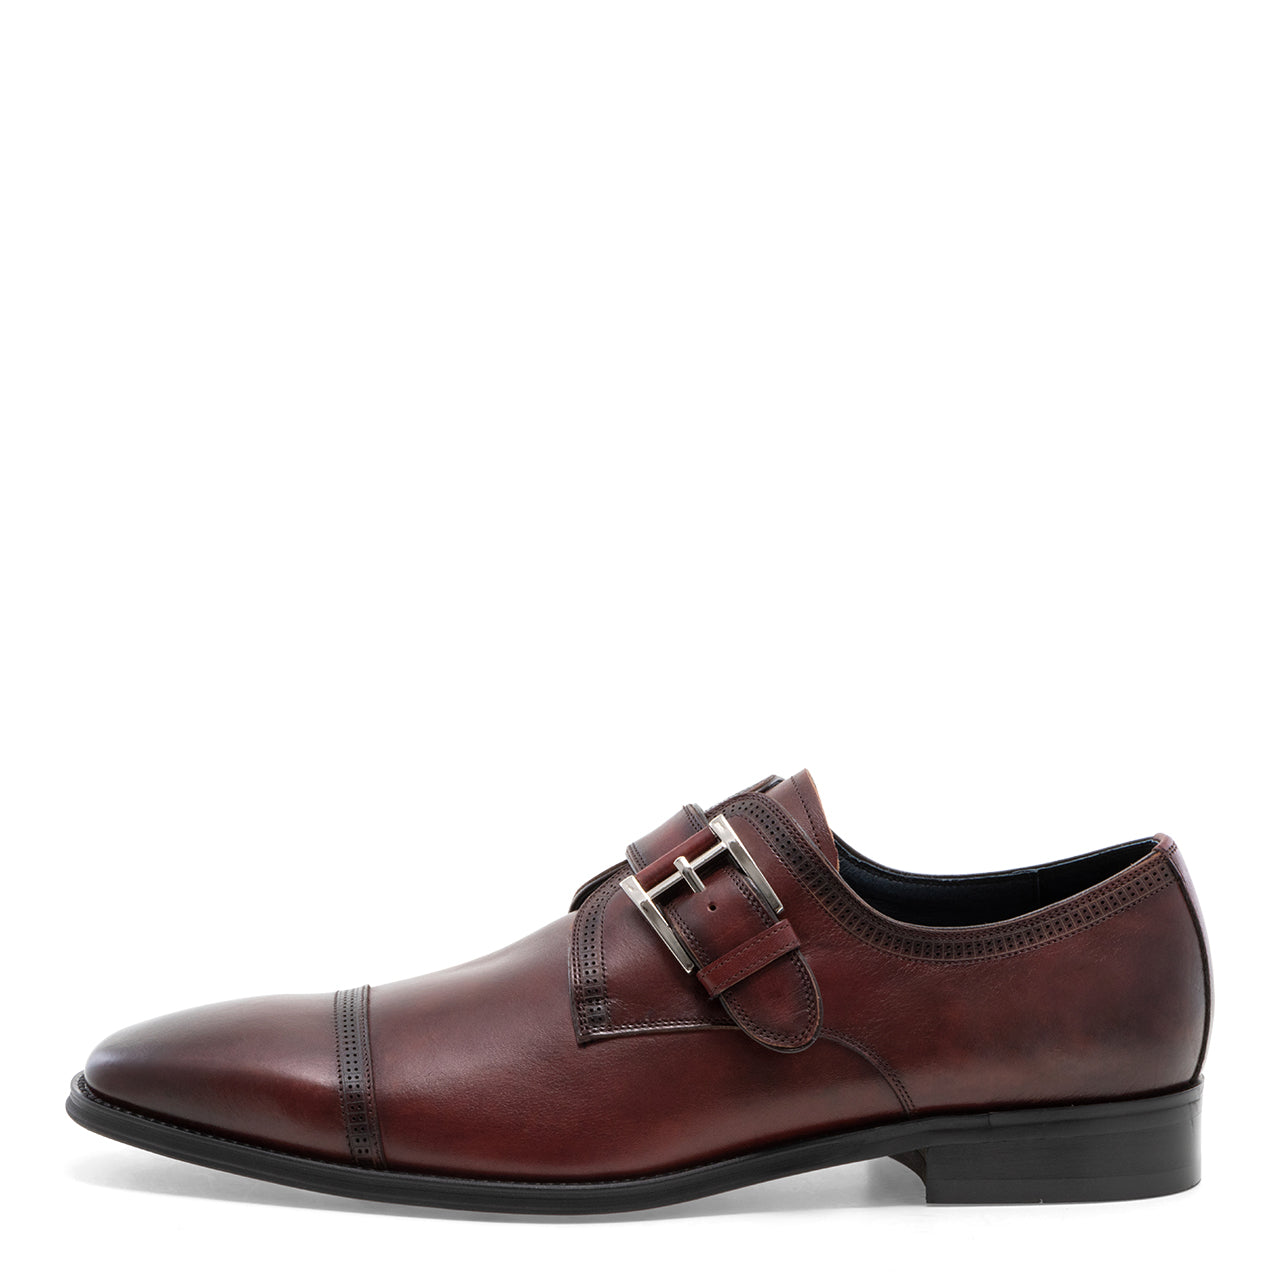 Mcneil - Burgundy Single Monk Strap Oxford Dress Shoes for Men by Jump 2